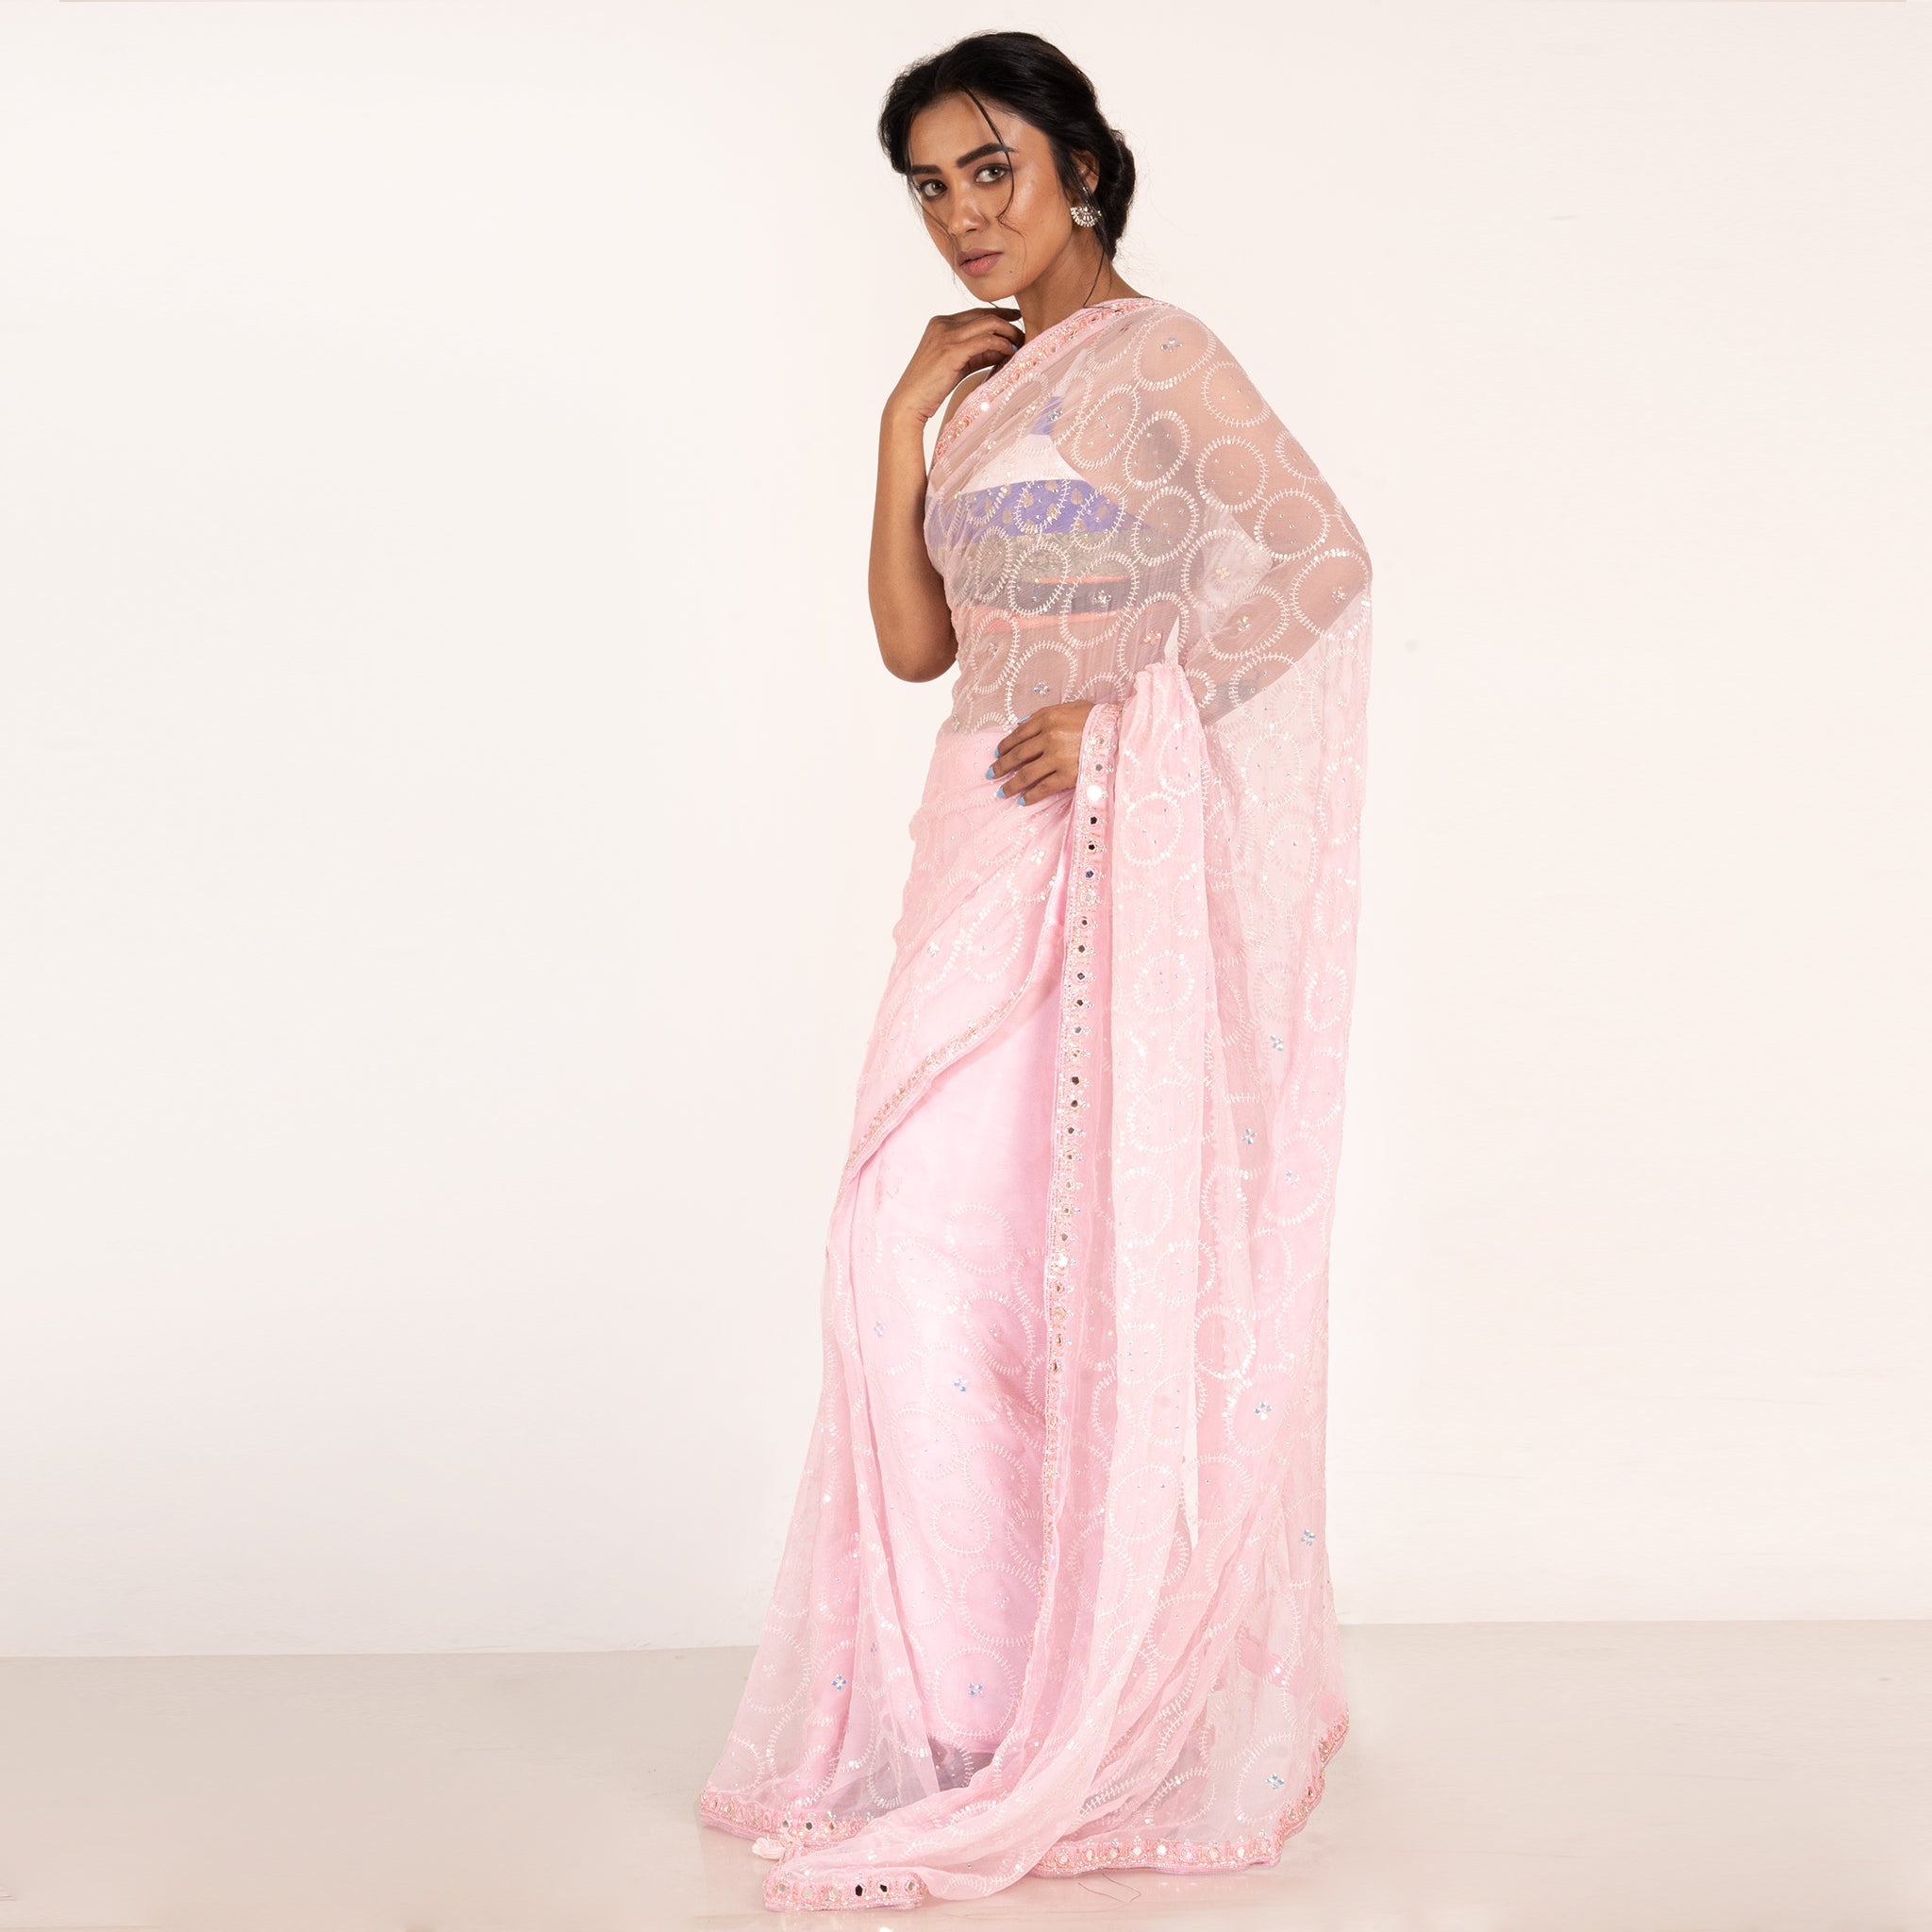 Women's Powder Pink Pure Chiffon Fully Embroidered Saree With Crystalisation - Boveee